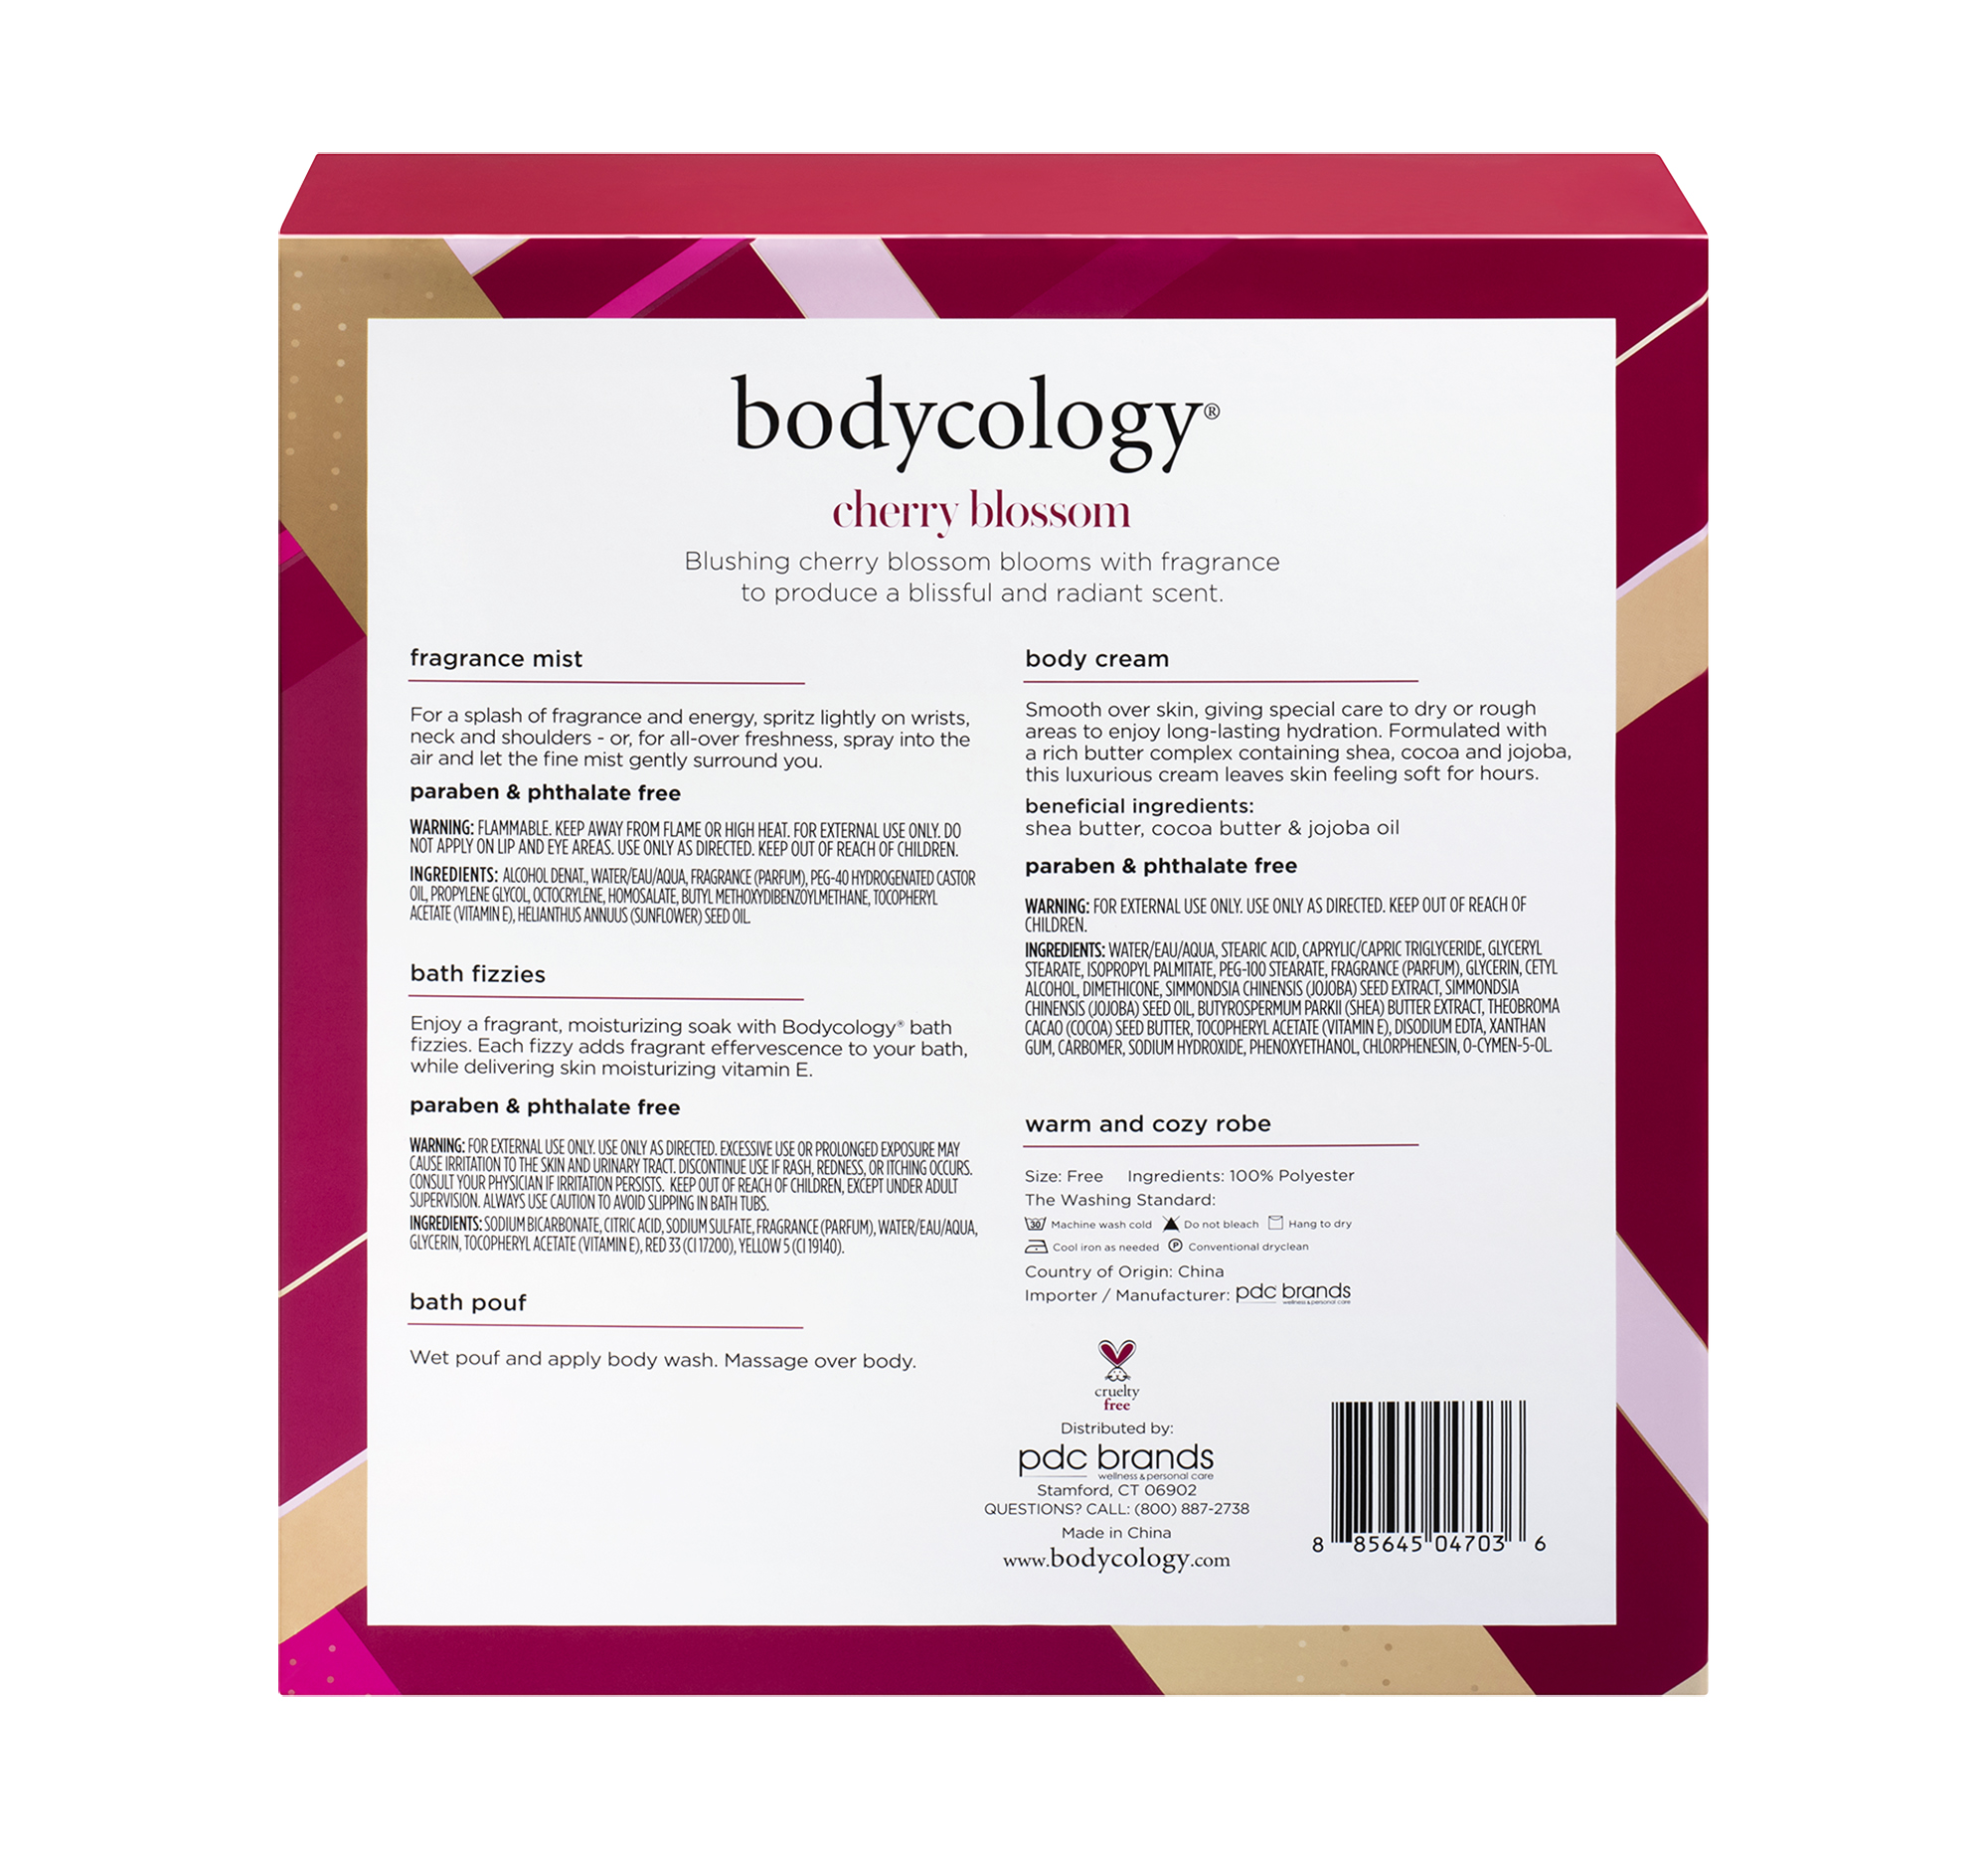 Bodycology Cherry Blossom Relaxed Robe Bath & Body Gift Set, 5 PC - image 5 of 6